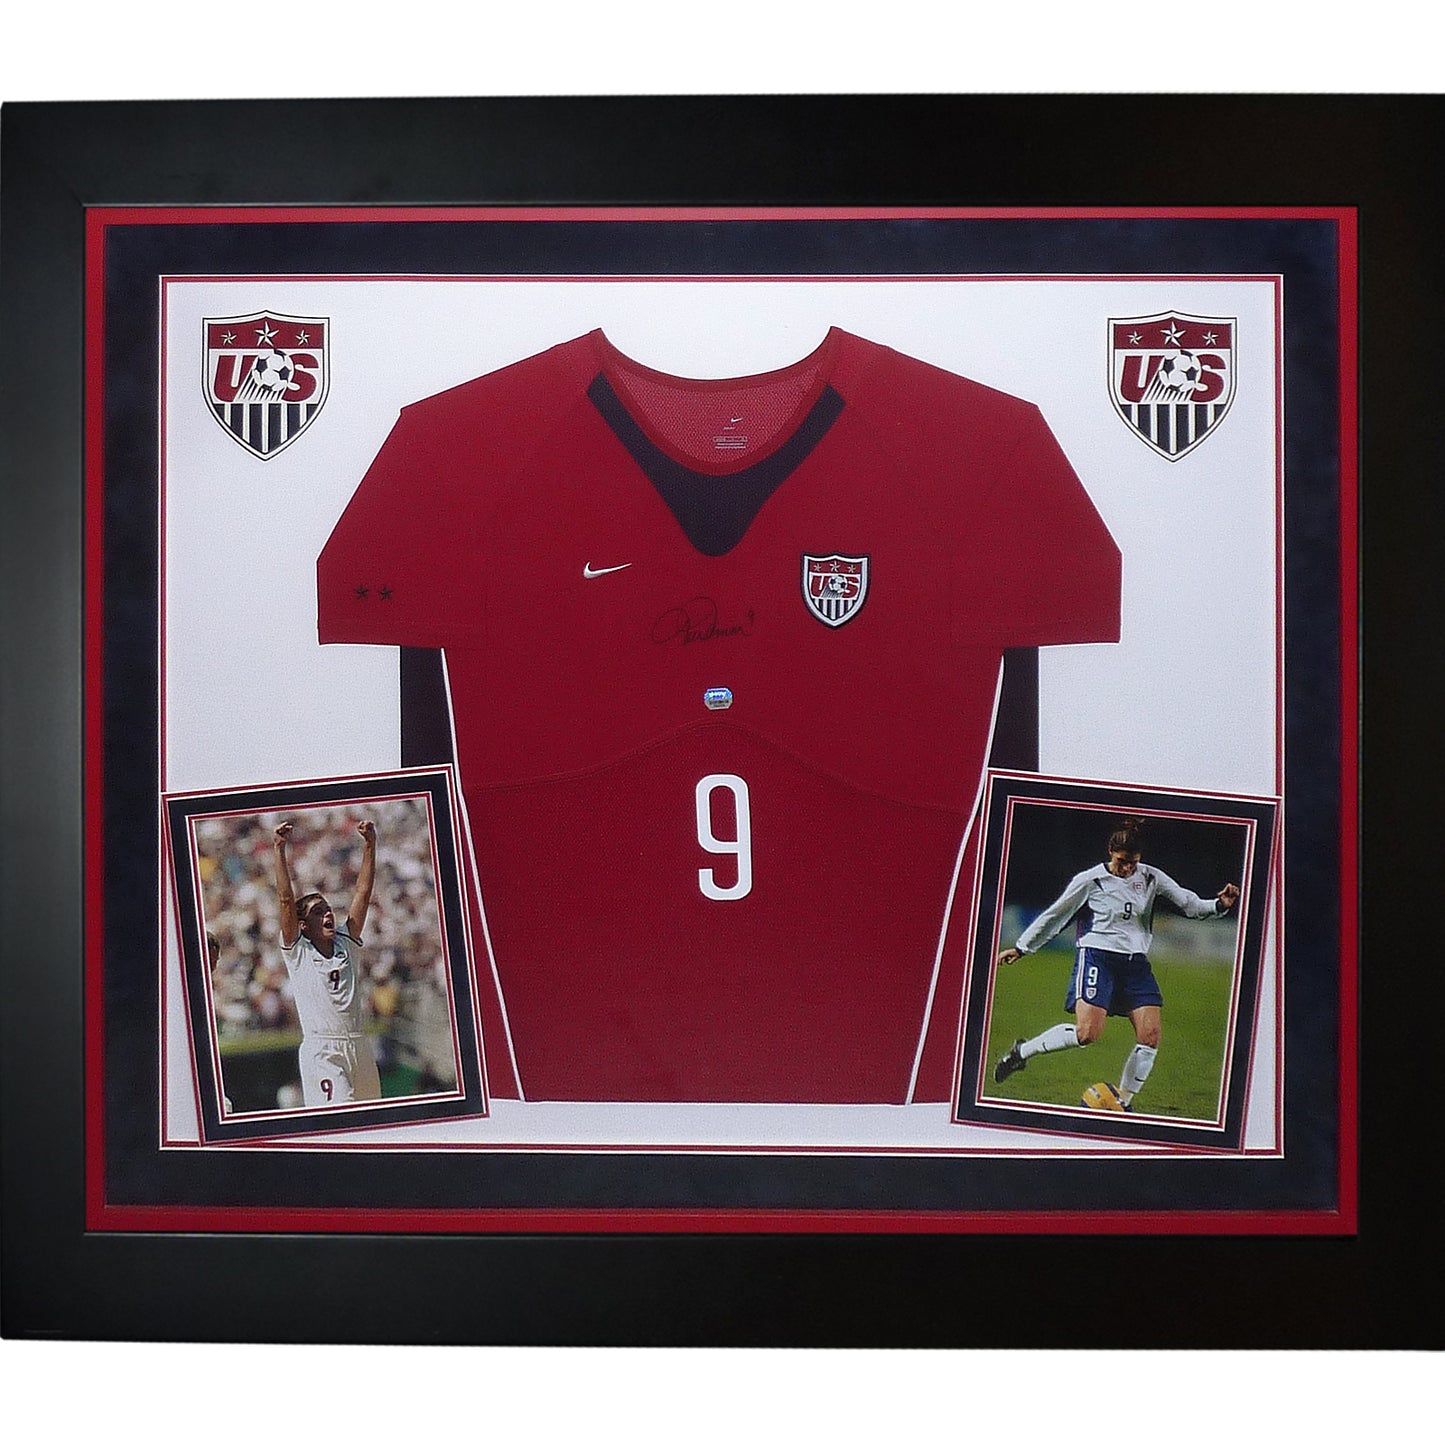 Mia Hamm Autographed USA Soccer (Red #9) Deluxe Framed Nike Jersey - Fanatics